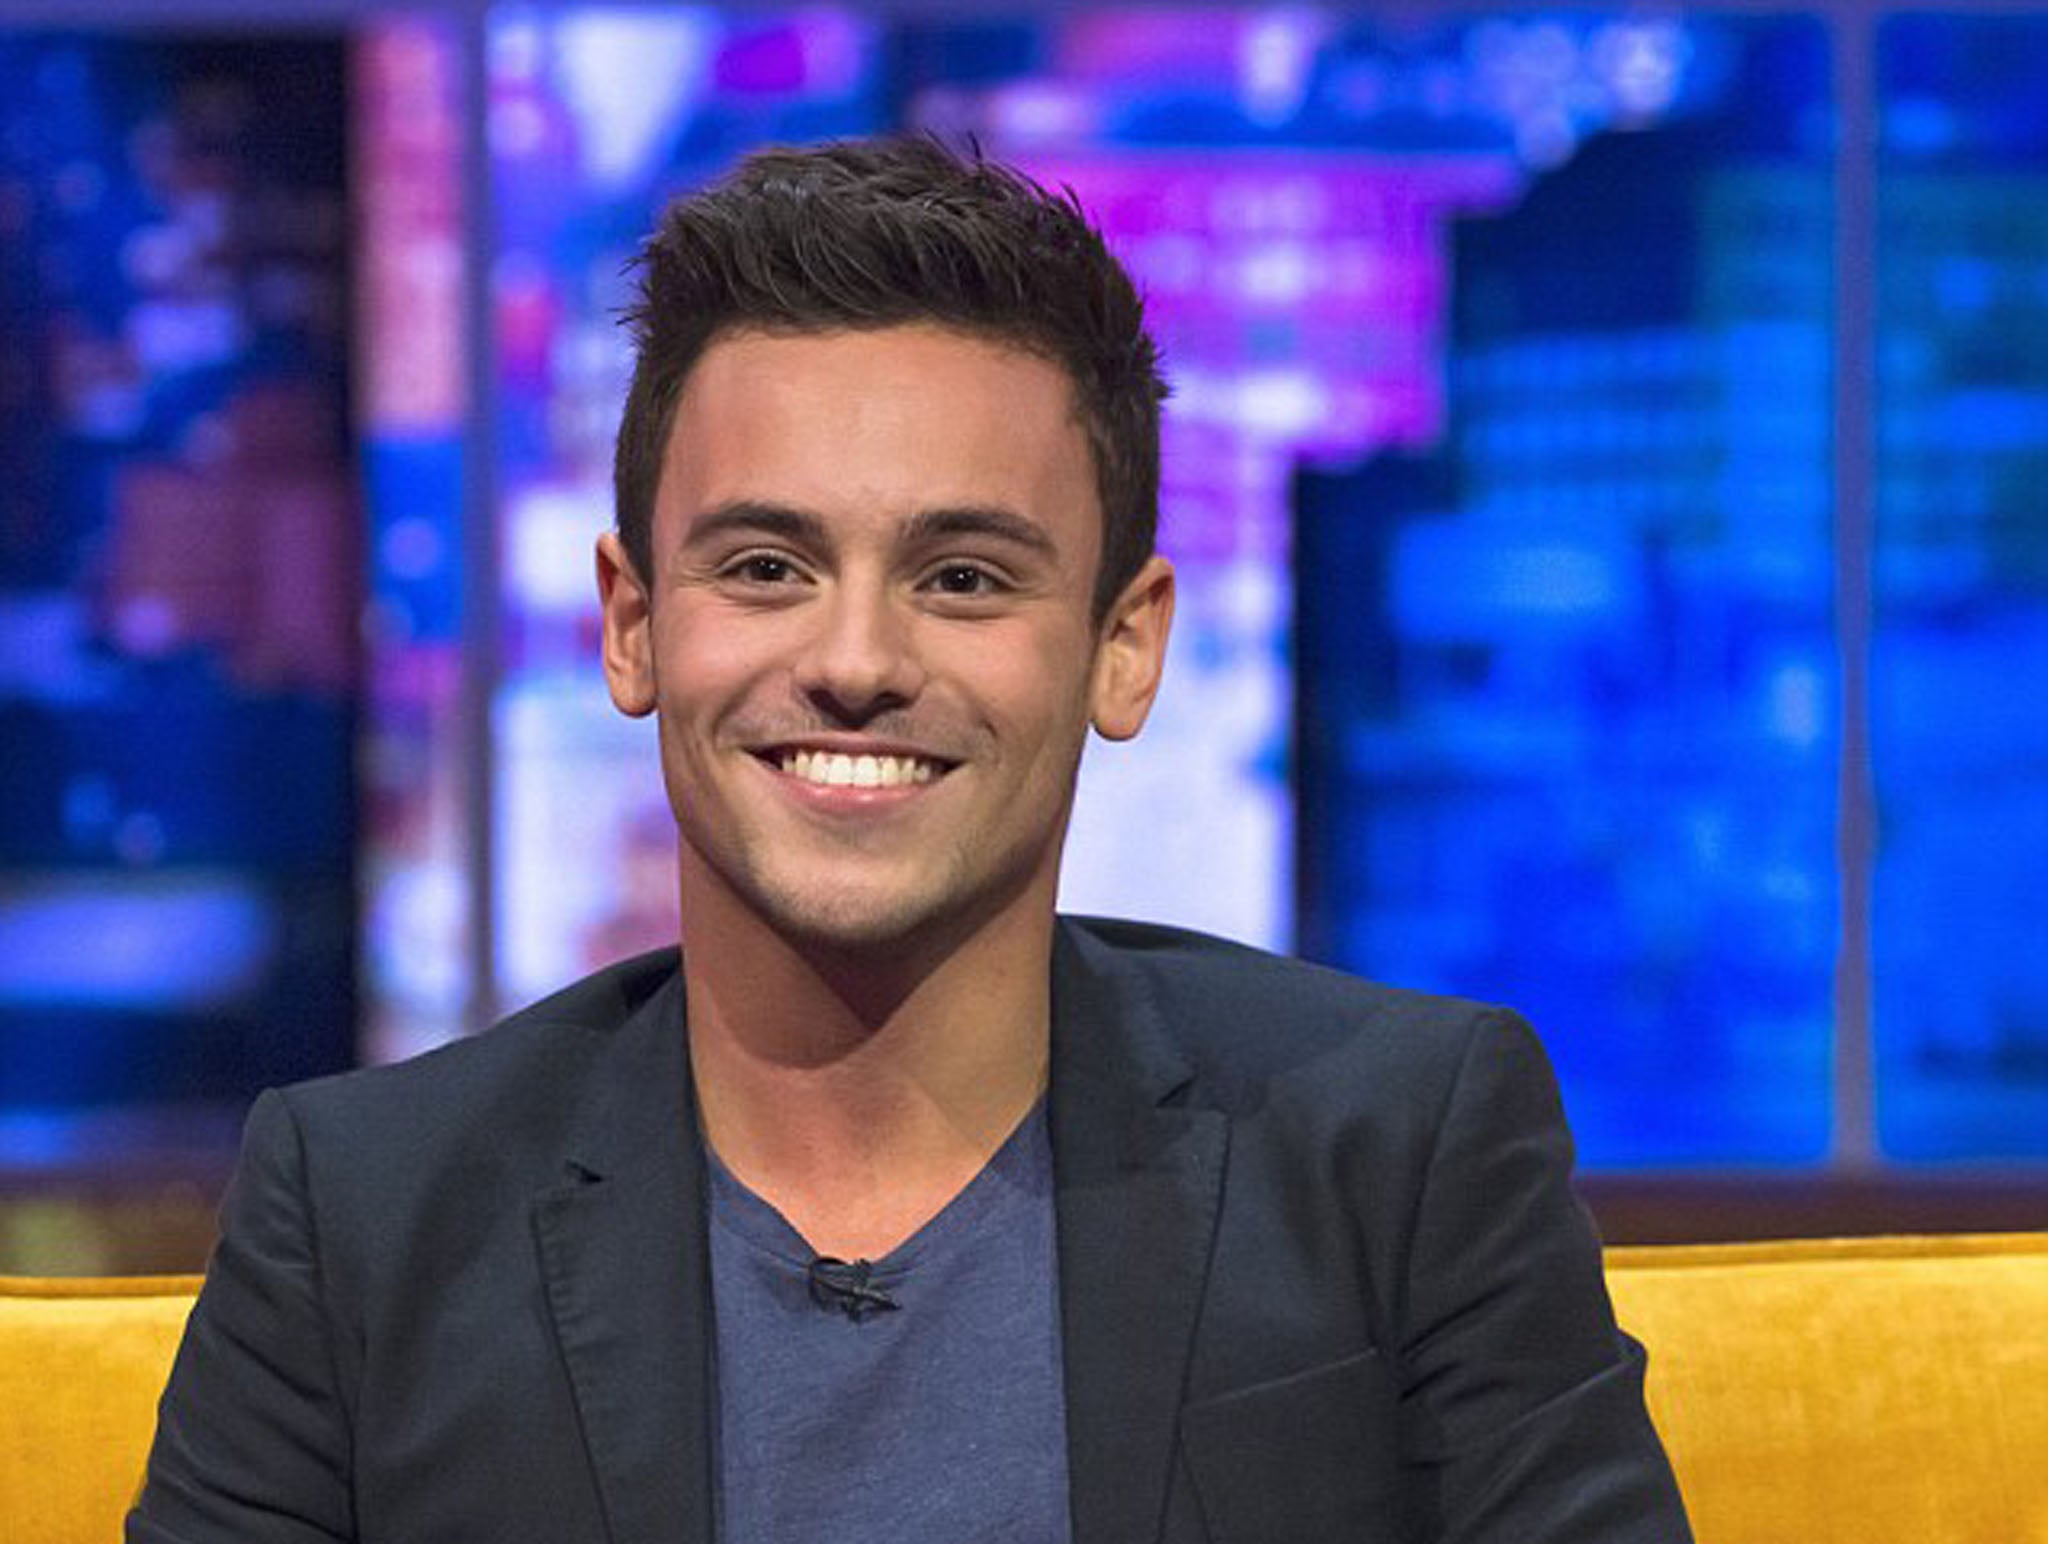 Tom Daley breaks his silence on his new romance in an interview on The Jonathan Ross Show